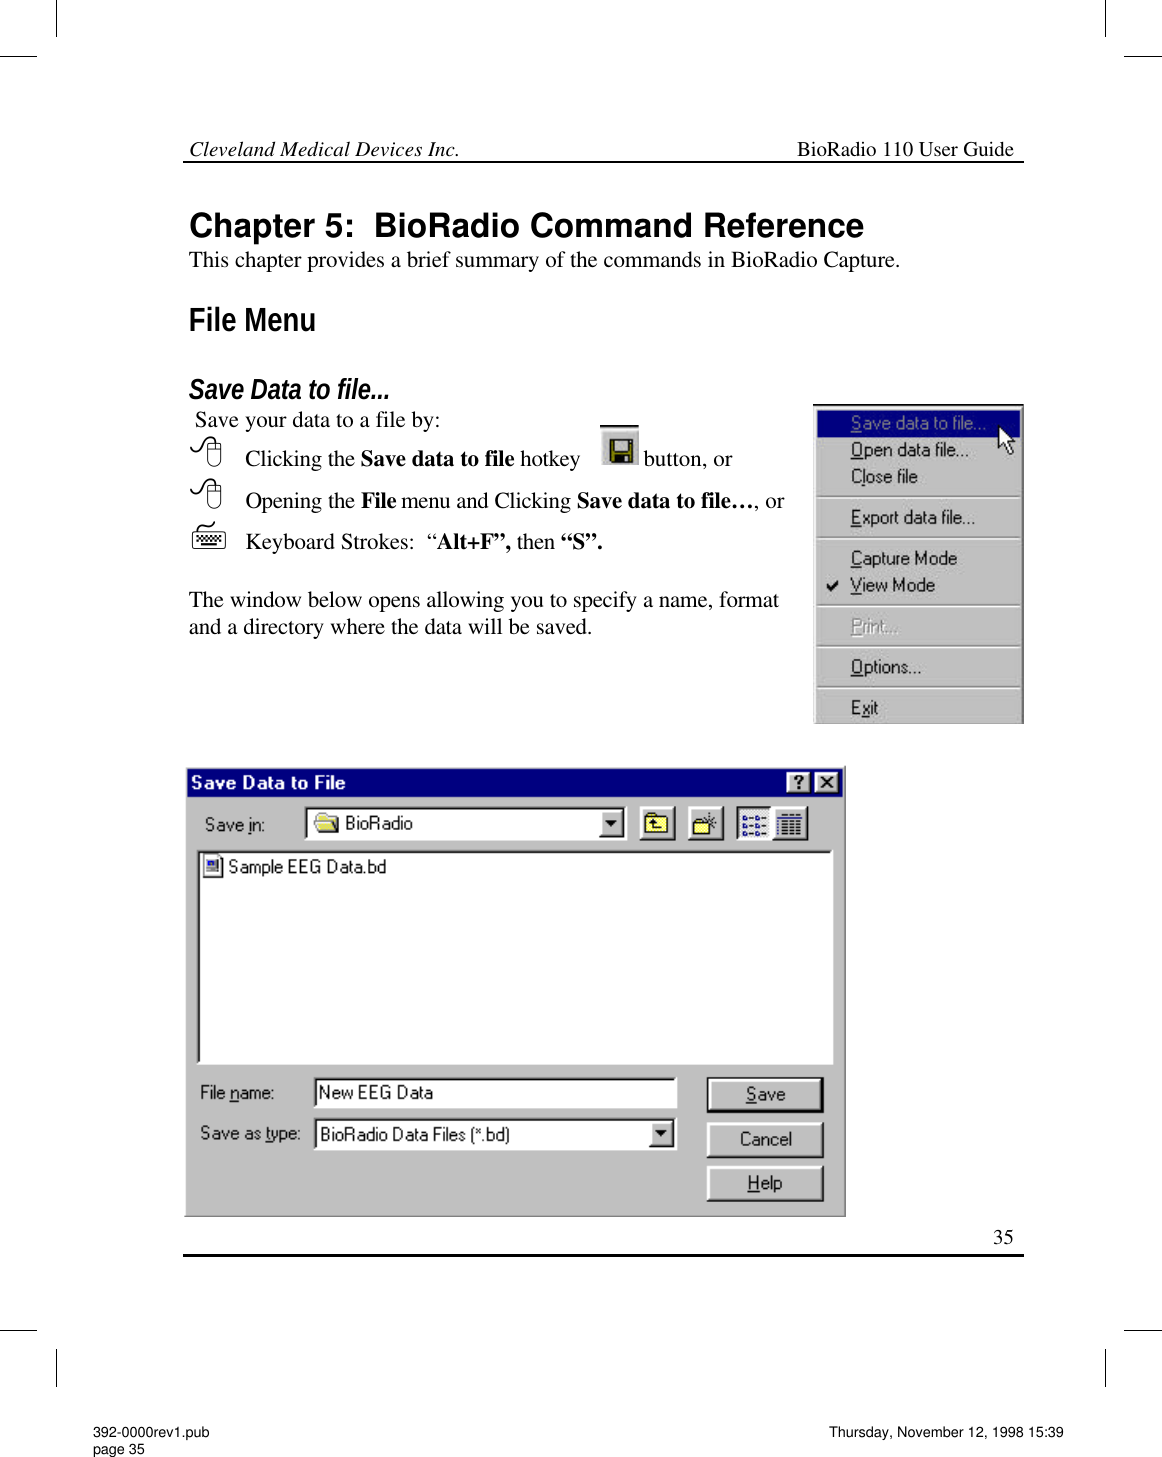 Cleveland Medical Devices Inc.                                                             BioRadio 110 User Guide                                                                                                                                                   35 Chapter 5:  BioRadio Command Reference This chapter provides a brief summary of the commands in BioRadio Capture.  File Menu  Save Data to file...  Save your data to a file by: 8 Clicking the Save data to file hotkey  button, or 8 Opening the File  menu and Clicking Save data to file…, or     7 Keyboard Strokes:  “Alt+F”, then “S”.  The window below opens allowing you to specify a name, format and a directory where the data will be saved.   392-0000rev1.pub page 35 Thursday, November 12, 1998 15:39 